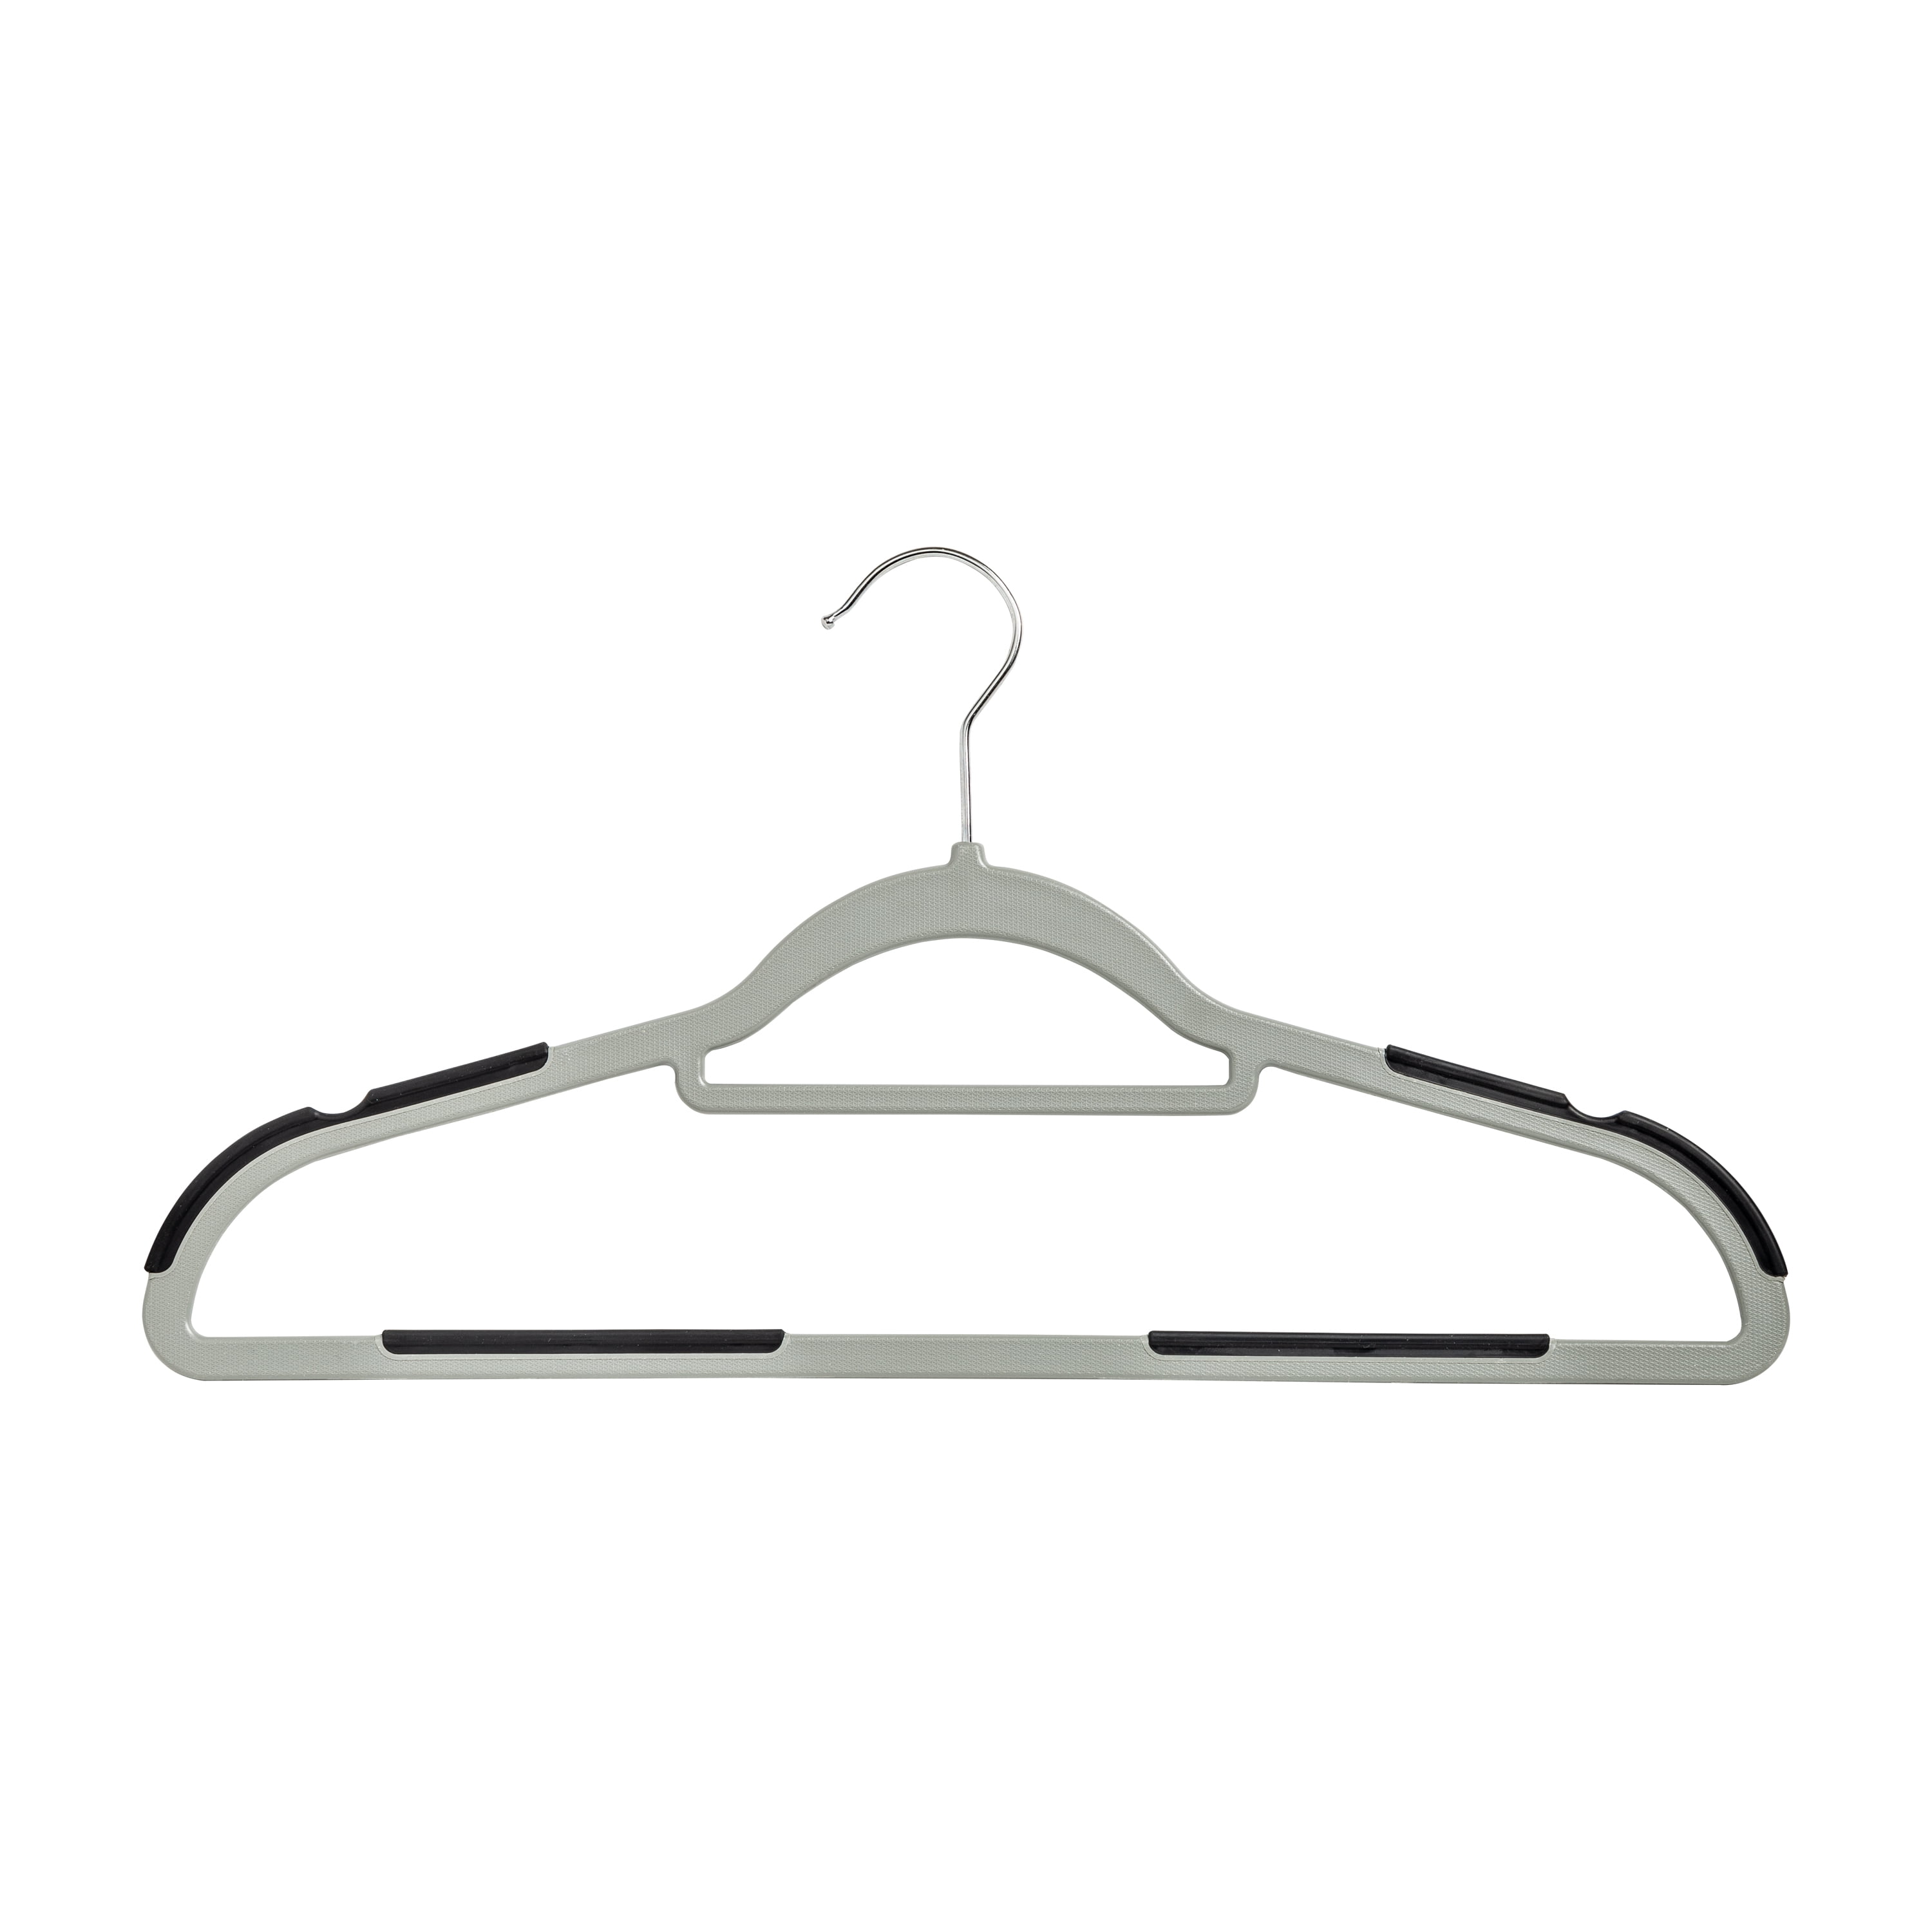 Neaties Plastic Clothes Hangers, 30 Pack, White, Lightweight, Slim, Heavy  Duty, Smooth Finish, Durable, Tough, Double Bar Hooks, Snag-Free, Non-Slip